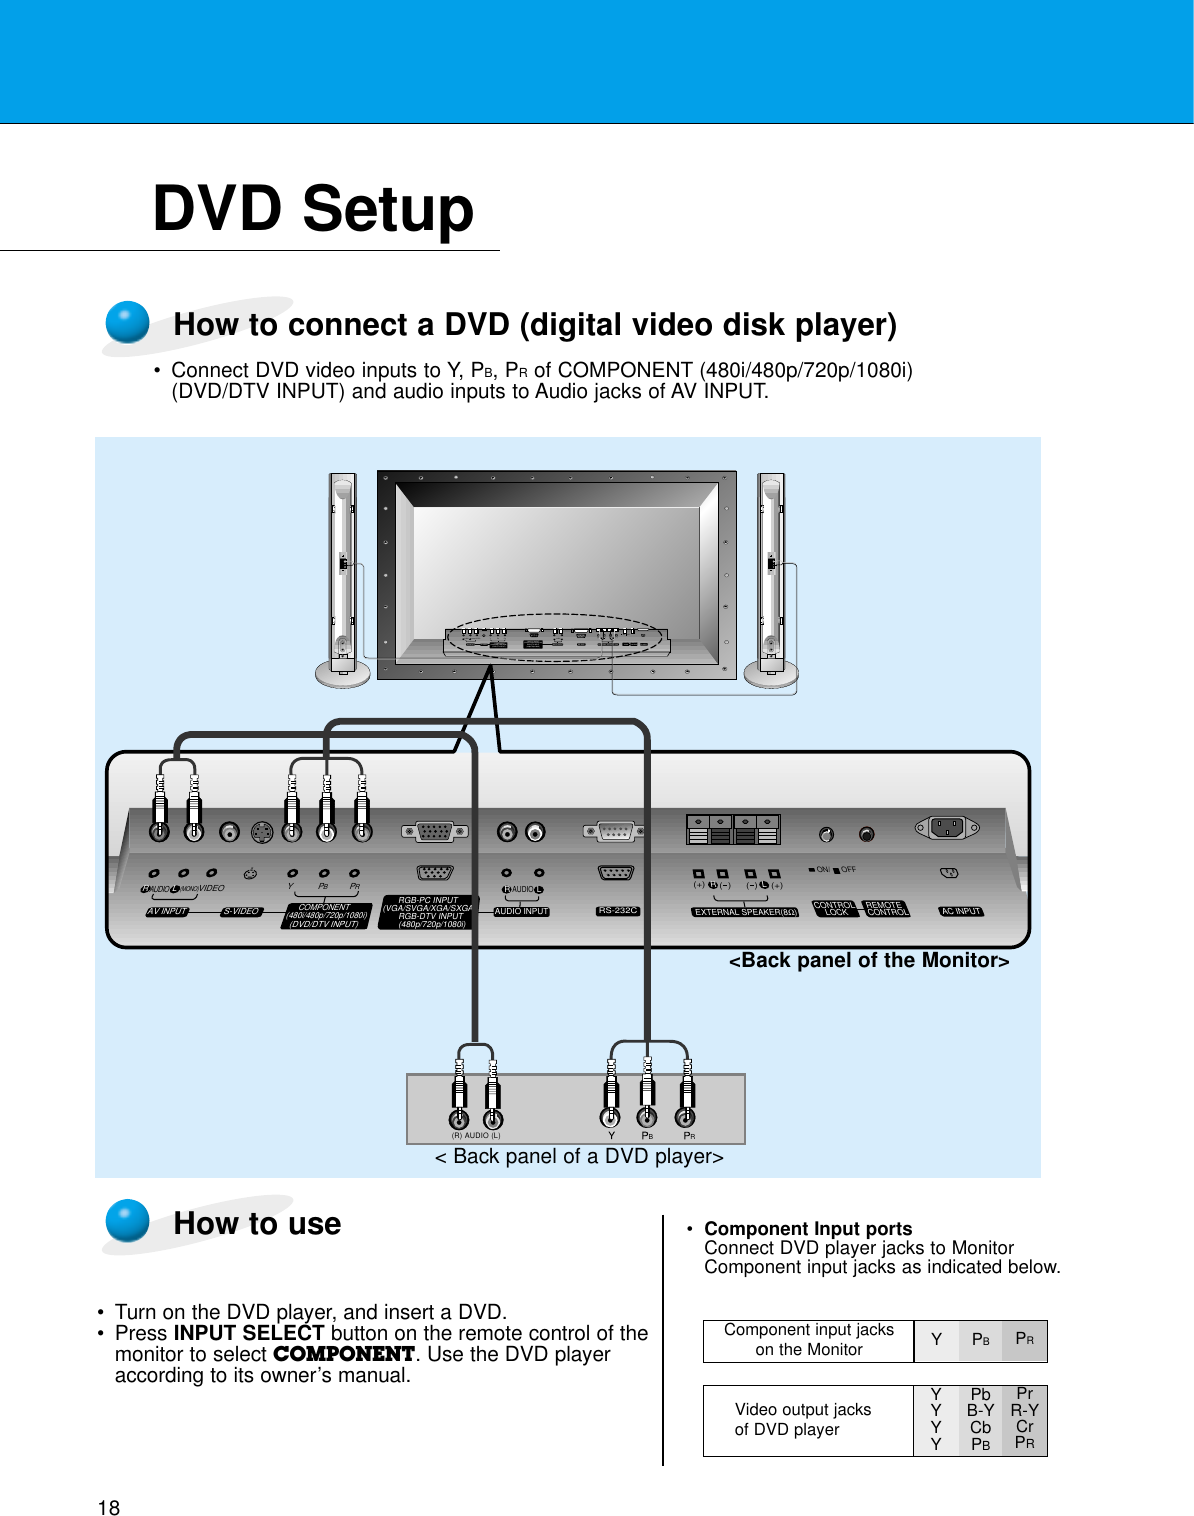 18DVD Setup•Connect DVD video inputs to Y, PB, PRof COMPONENT (480i/480p/720p/1080i)(DVD/DTV INPUT) and audio inputs to Audio jacks of AV INPUT.How to connect a DVD (digital video disk player)How to use•Turn on the DVD player, and insert a DVD.•Press INPUT SELECT button on the remote control of themonitor to select COMPONENT. Use the DVD playeraccording to its owner’s manual.•Component Input portsConnect DVD player jacks to MonitorComponent input jacks as indicated below.(+) (  ) (+)(  )AUDIO(MONO)RLVIDEO Y PBRPAV INPUTAUDIORL RLEXTERNAL SPEAKER (8Ω) AC INPUTAUDIO INPUTS-VIDEO COMPONENT(480i/480p/720p/1080i)RGB-PC INPUT(VGA/SVGA/XGA/SXGA)RGB-DTV INPUT(480p/720p/1080i)(DVD/DTV INPUT)(+) (  ) (+)(  )AUDIO(MONO)RLAV INPUT S-VIDEOCOMPONENT(480i/480p/720p/1080i)(DVD/DTV INPUT)RGB-PC INPUTRAUDIO INPUTEXTERNAL SPEAKER(8Ω)RLAC INPUTLAUDIO(VGA/SVGA/XGA/SXGA)RGB-DTV INPUT(480p/720p/1080i)VIDEO YPBPRBR(R) AUDIO (L)RS-232CRS-232CCONTROLLOCK REMOTECONTROLREMOTECONTROLCONTROLLOCKON/ OFFON/ OFF&lt; Back panel of a DVD player&gt;Component input jacks on the Monitor YPBPRVideo output jacks of DVD playerYYYYPbB-YCbPBPrR-YCrPR&lt;Back panel of the Monitor&gt;